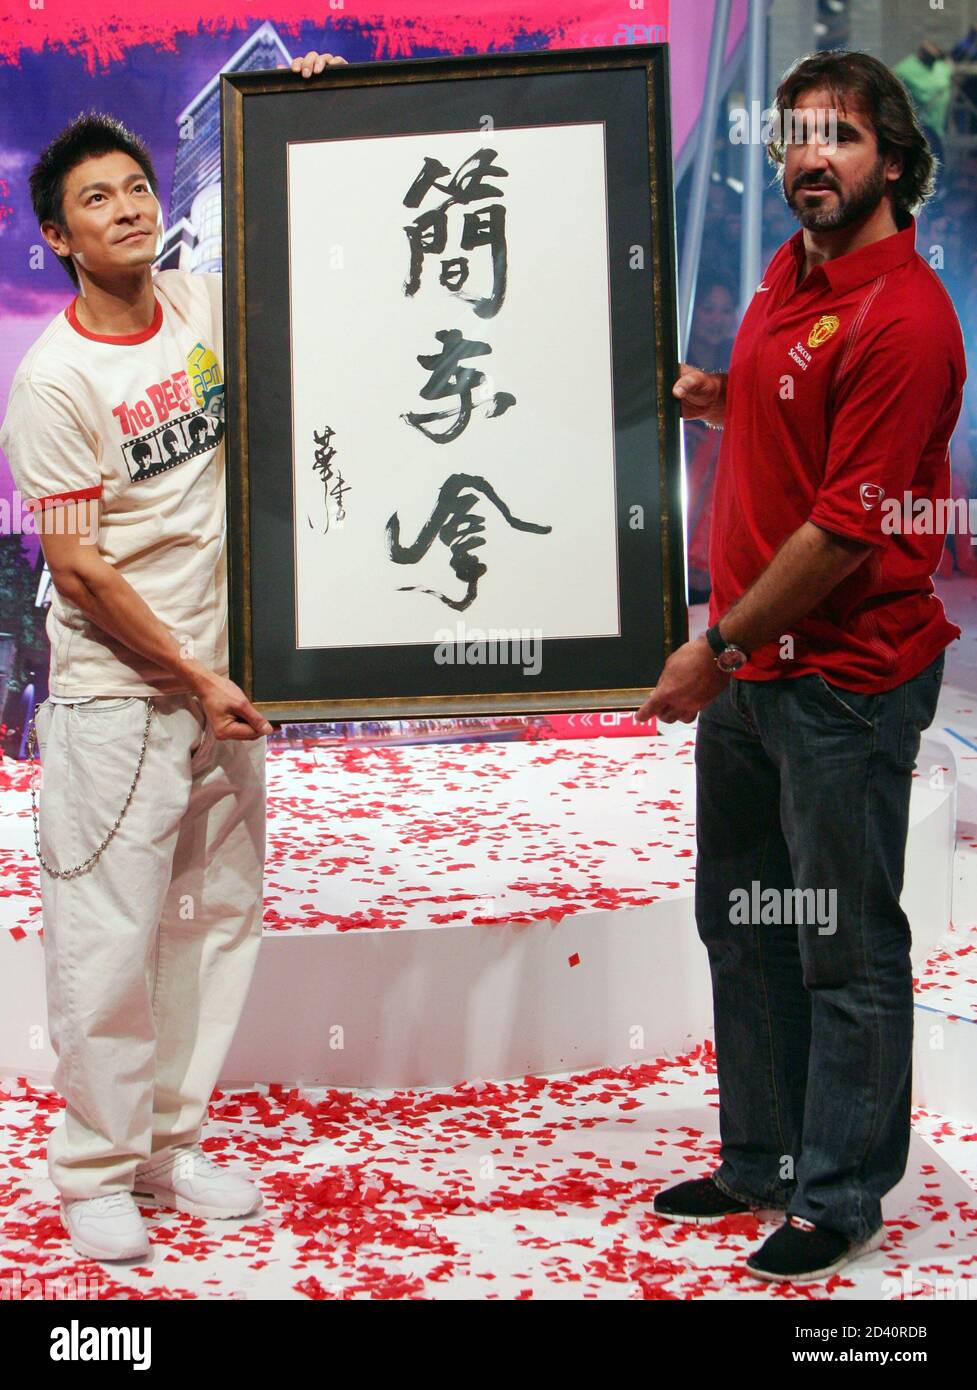 Former Manchester United player Eric Cantona (R) receives a Chinese calligraphy of his name from Hong Kong singer-actor Andy Lau as they attend a promotional event at a shopping mall in Hong Kong July 17, 2005. English team Manchester United will play against the Hong Kong National team on July 23, 2005. REUTERS/Paul Yeung  PY/JJ Stock Photo